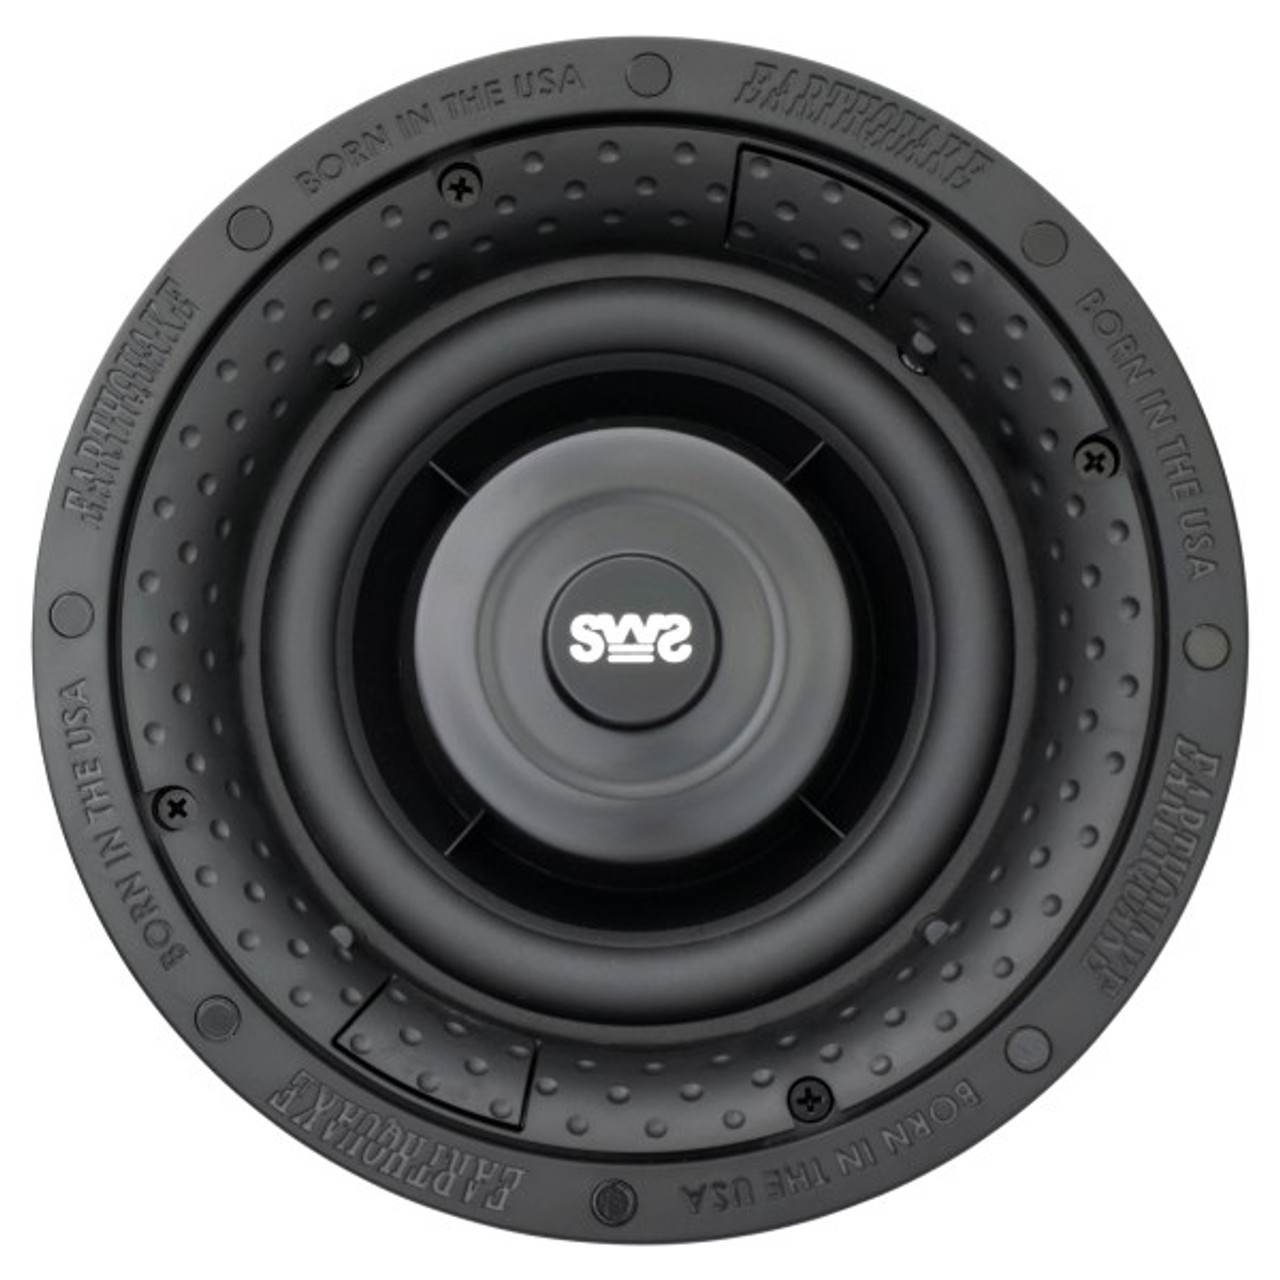 EarthQuake SUB6 6.5" 150W Passive In-Wall Subwoofer (Each)